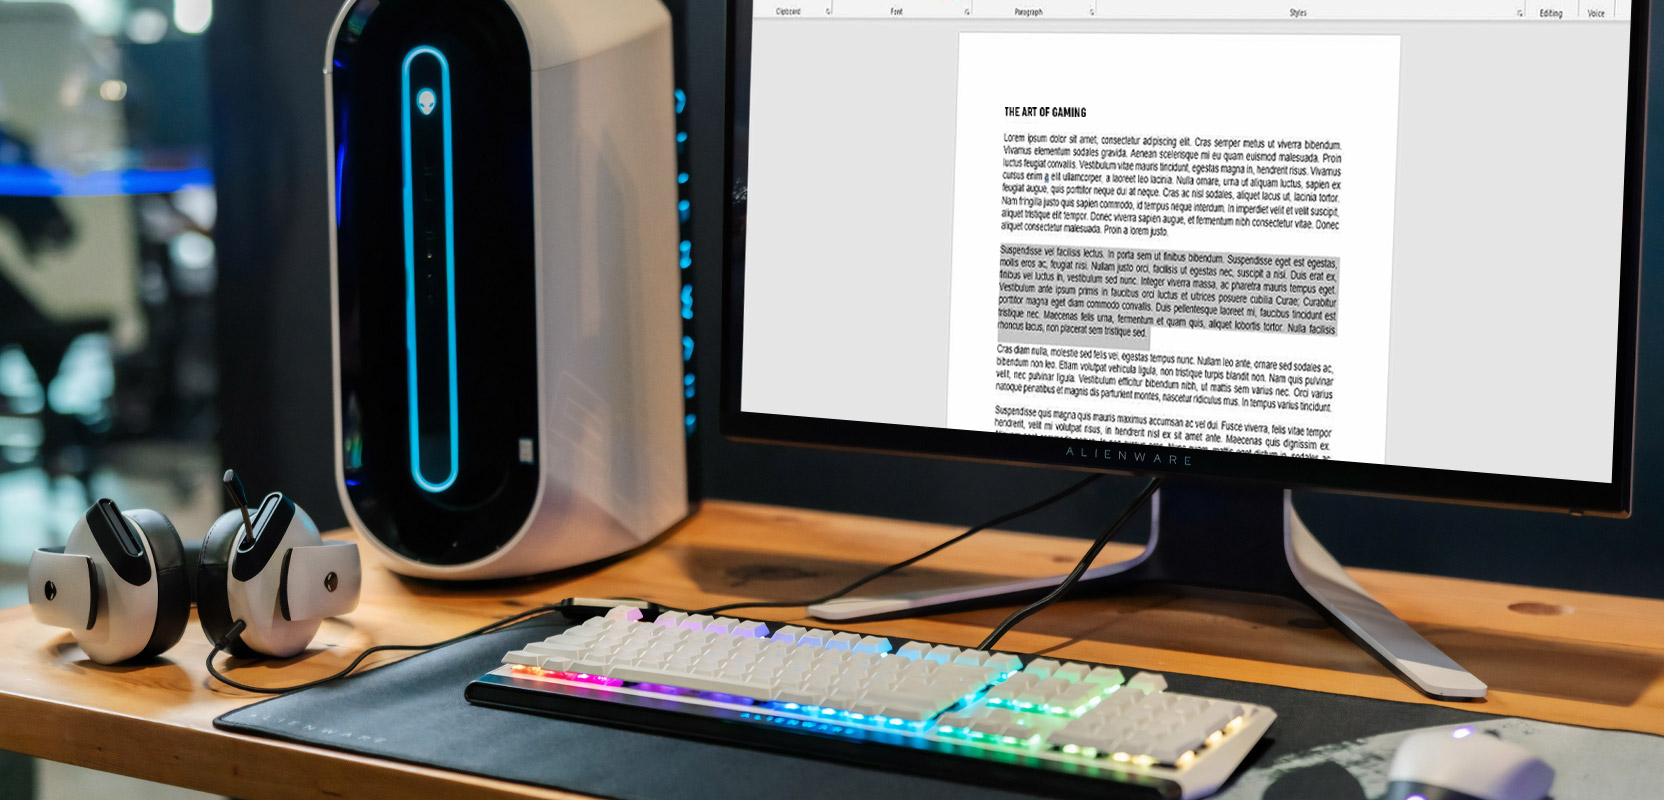 In-progress article about gaming being written on a computer screen